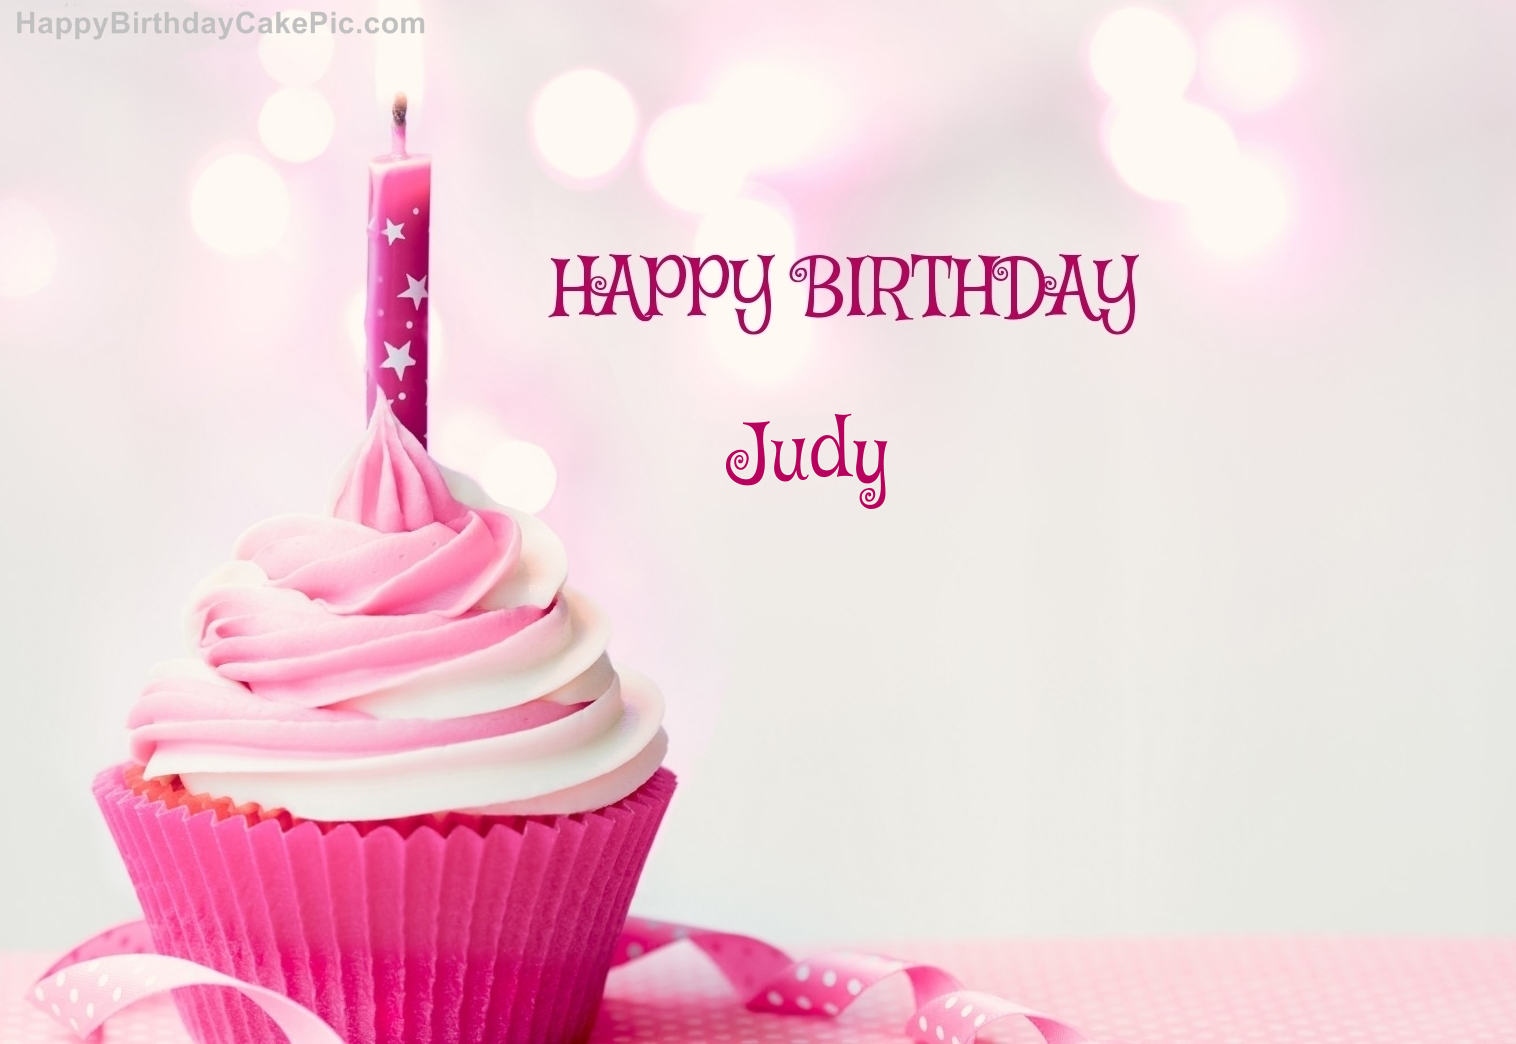 ️ Happy Birthday Cupcake Candle Pink Cake For Judy